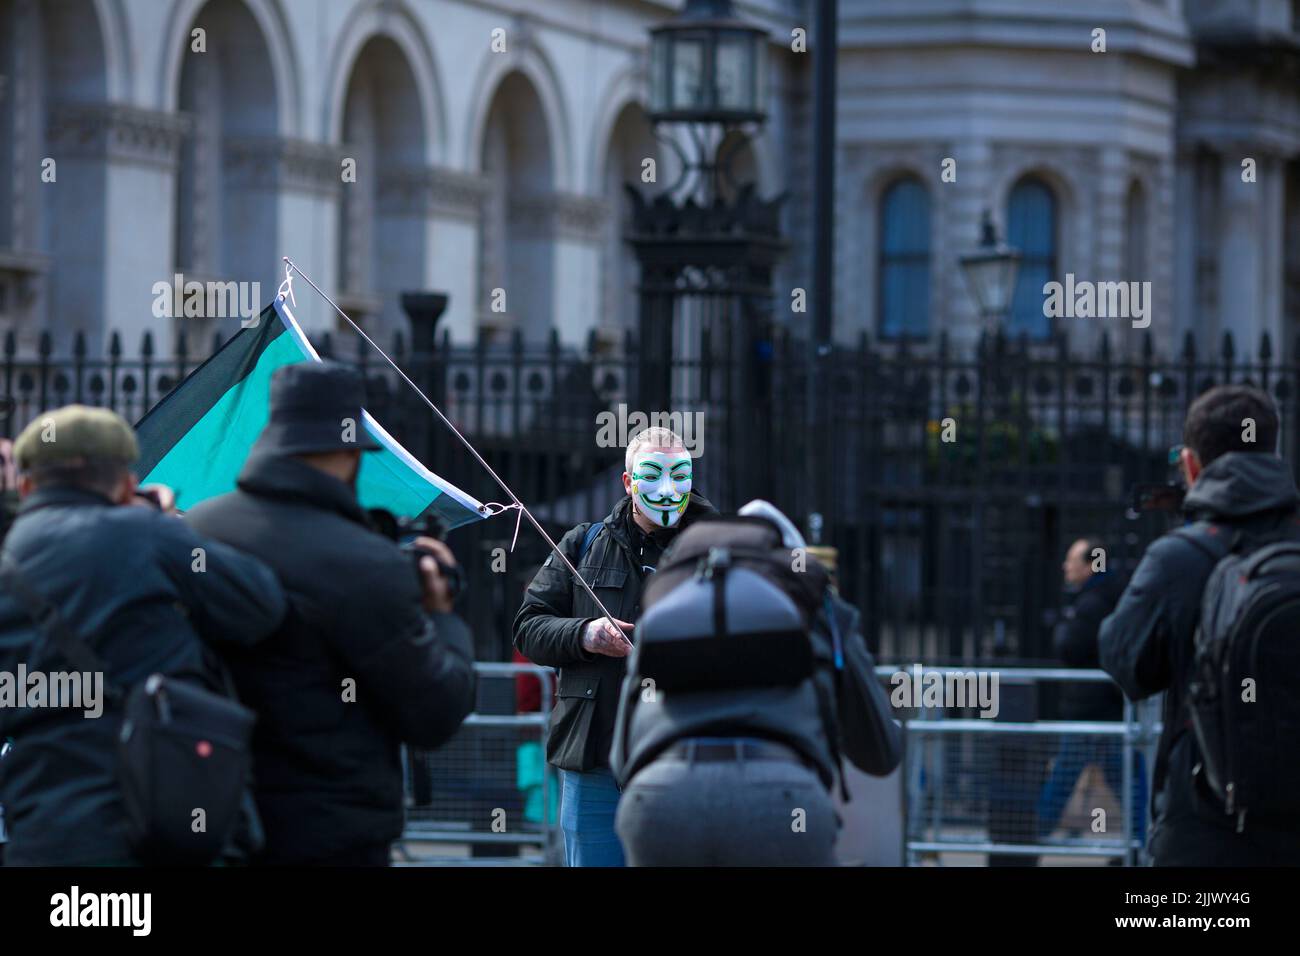 A person wearing a mask stands near the gates to Downing Street during a Cost of Living Crisis protest organised by the People’s Assembly in London. Stock Photo